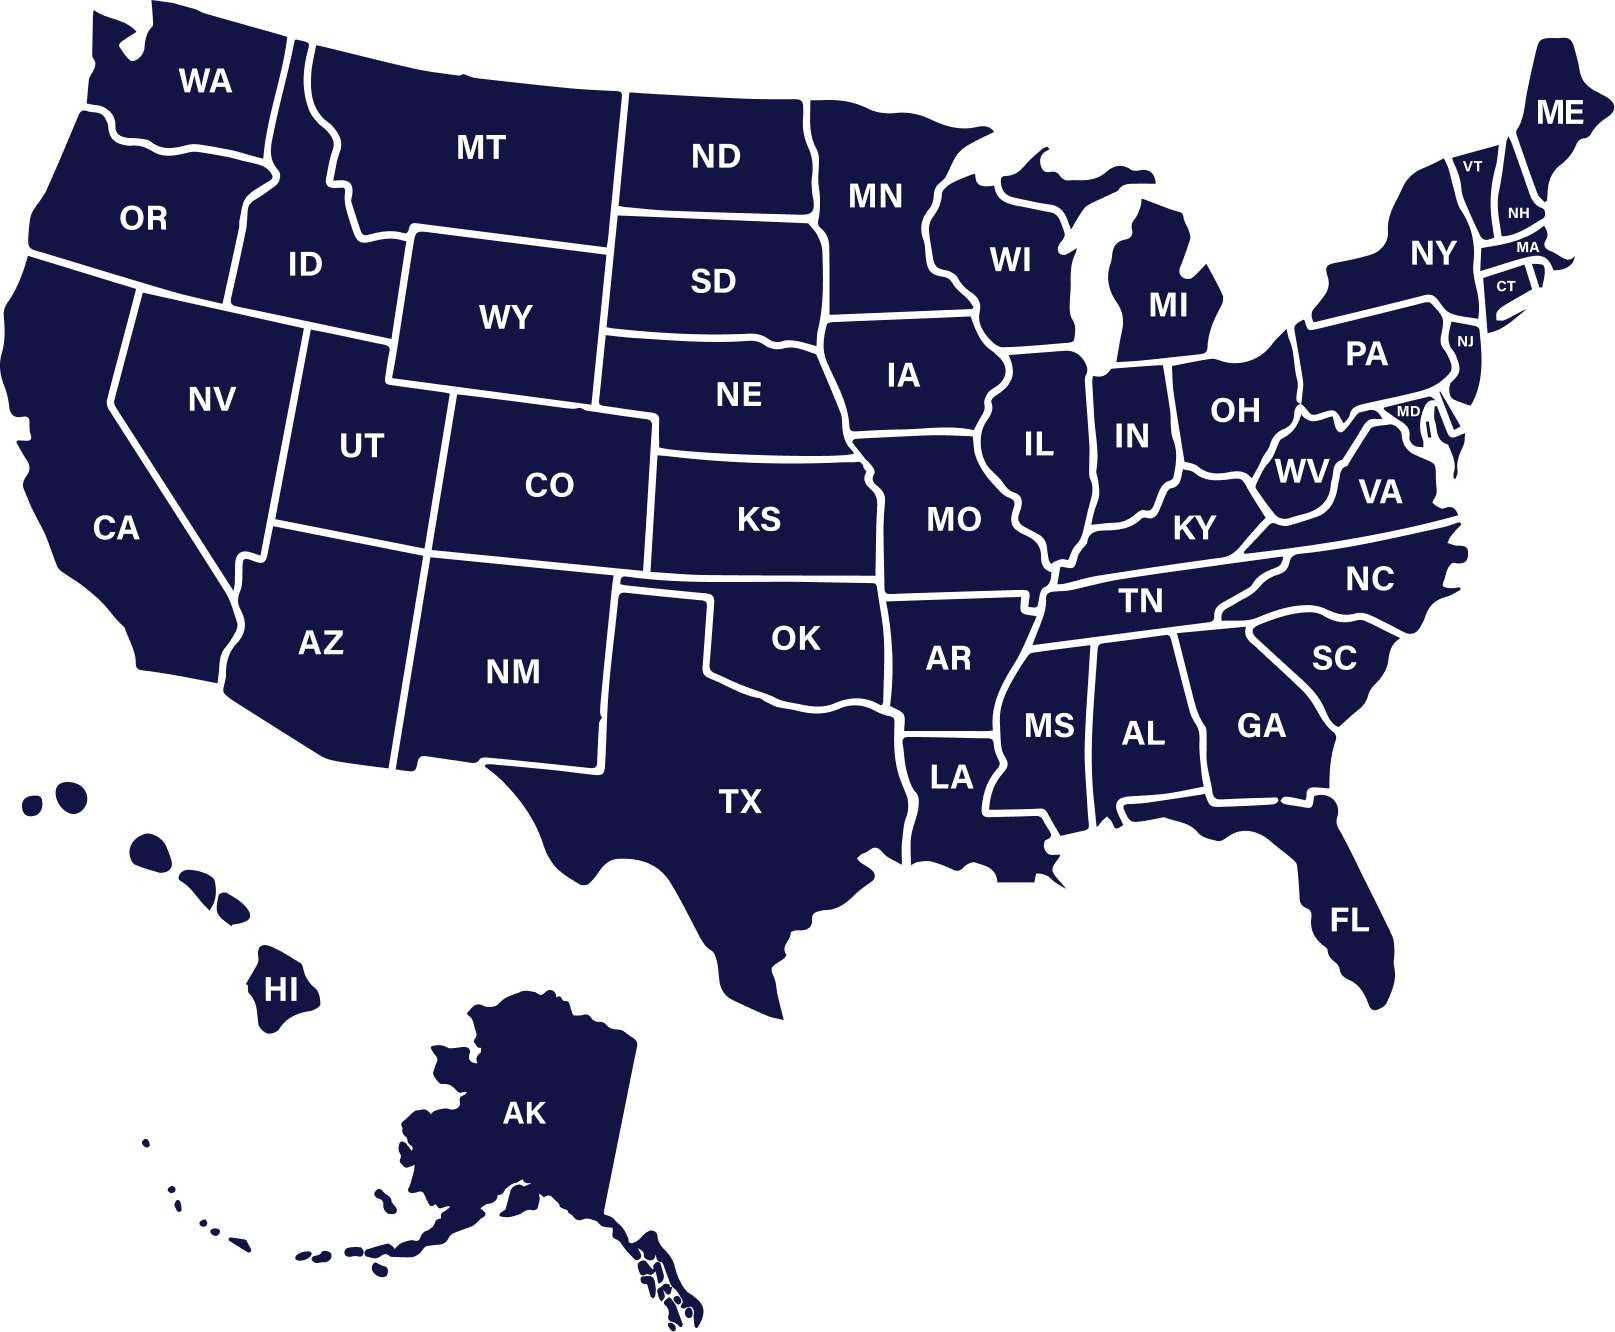 Graphic map of the United States in purple with two-letter state names